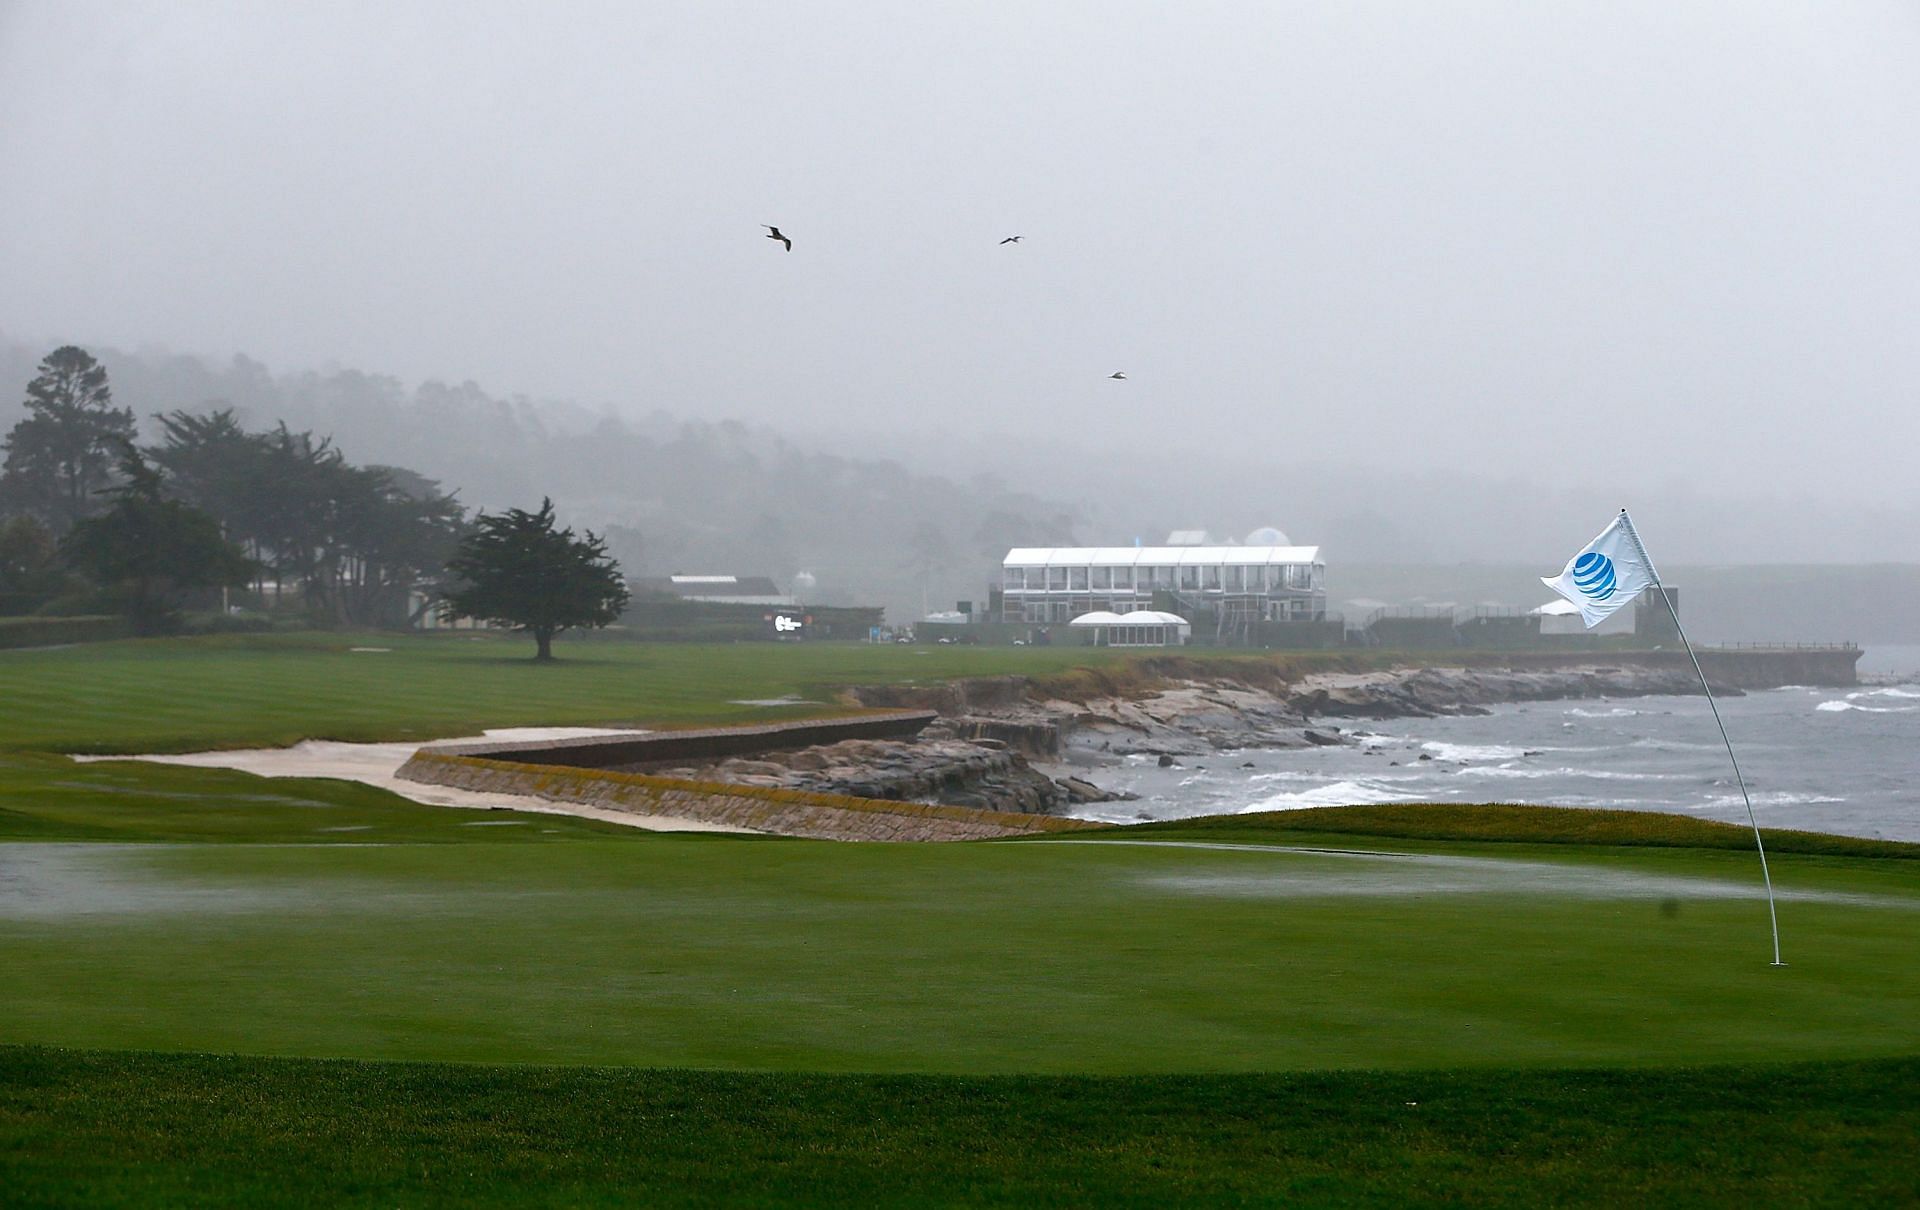 AT&amp;T Pebble Beach National Pro-Am - Preview Day 2